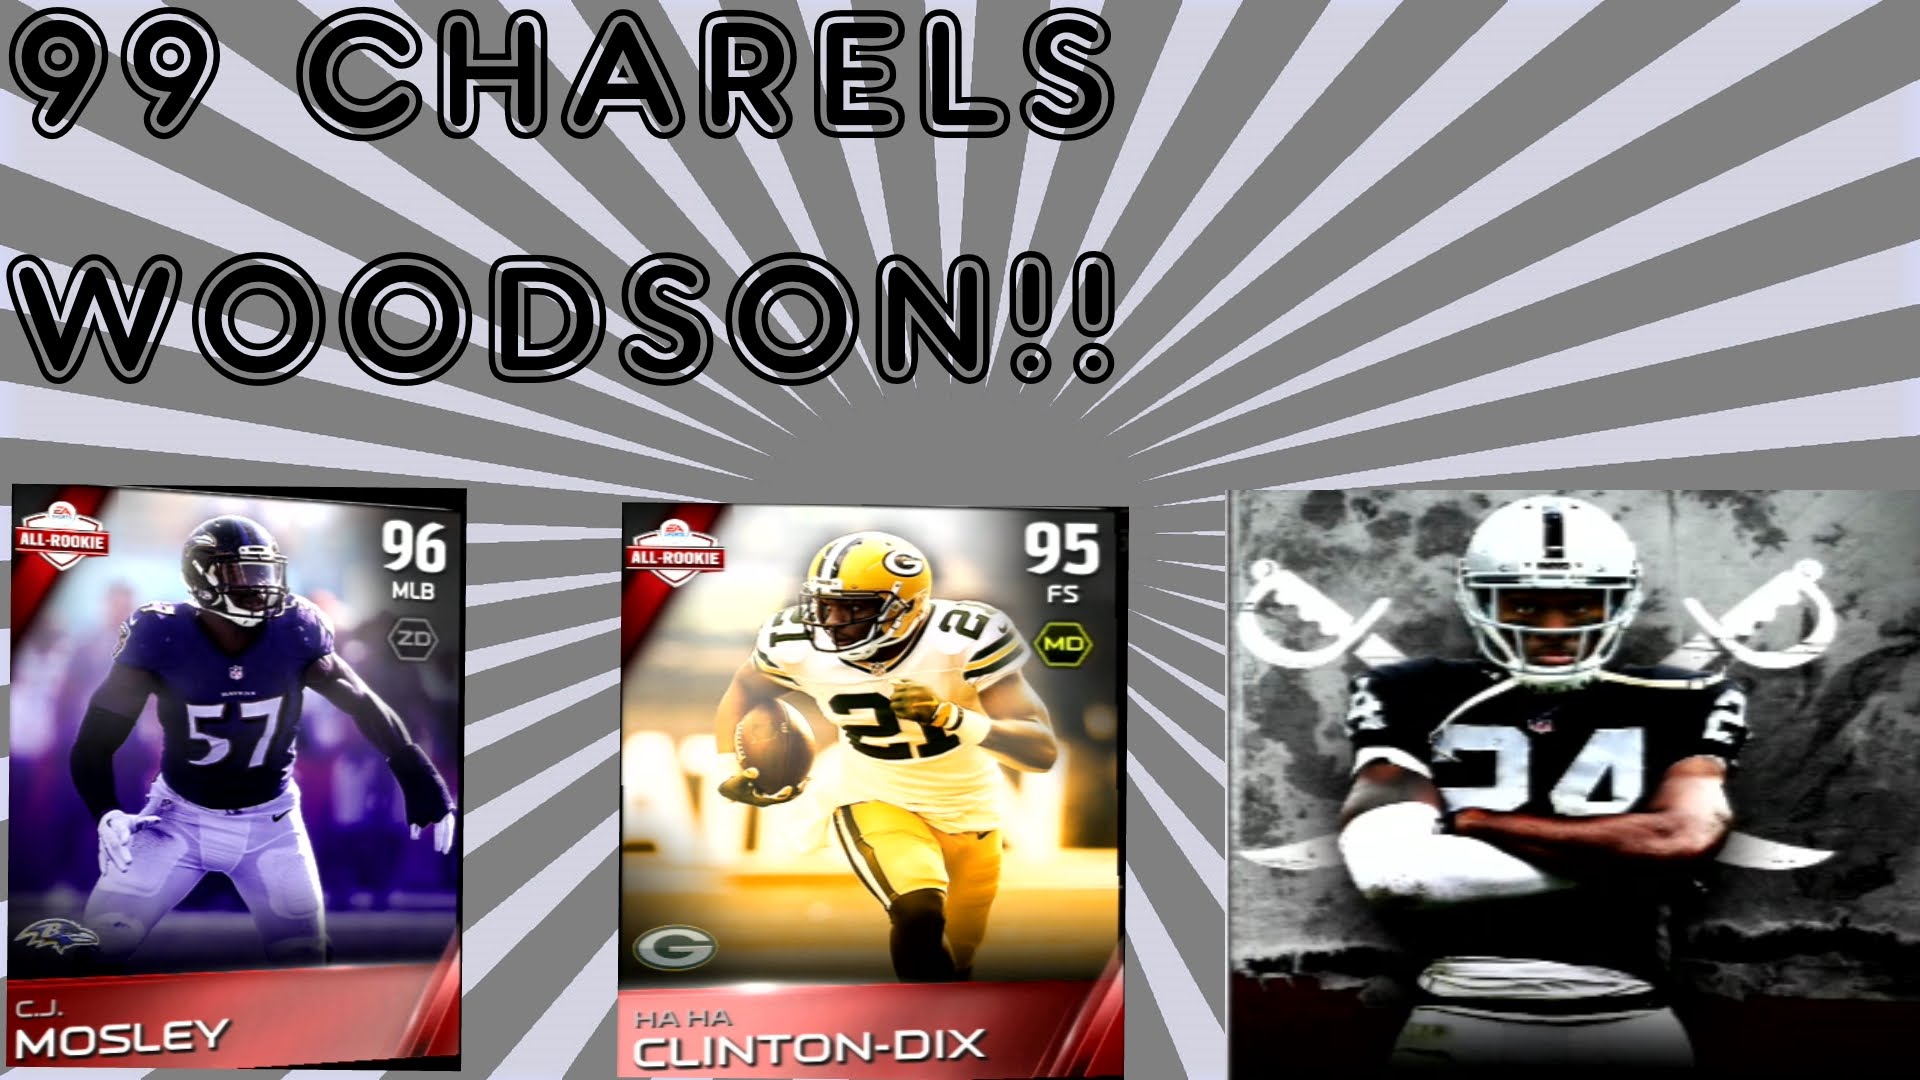 99 CHARLES WOODSON MADDEN 15 ULTIMATE TEAM PS3 - YouTube